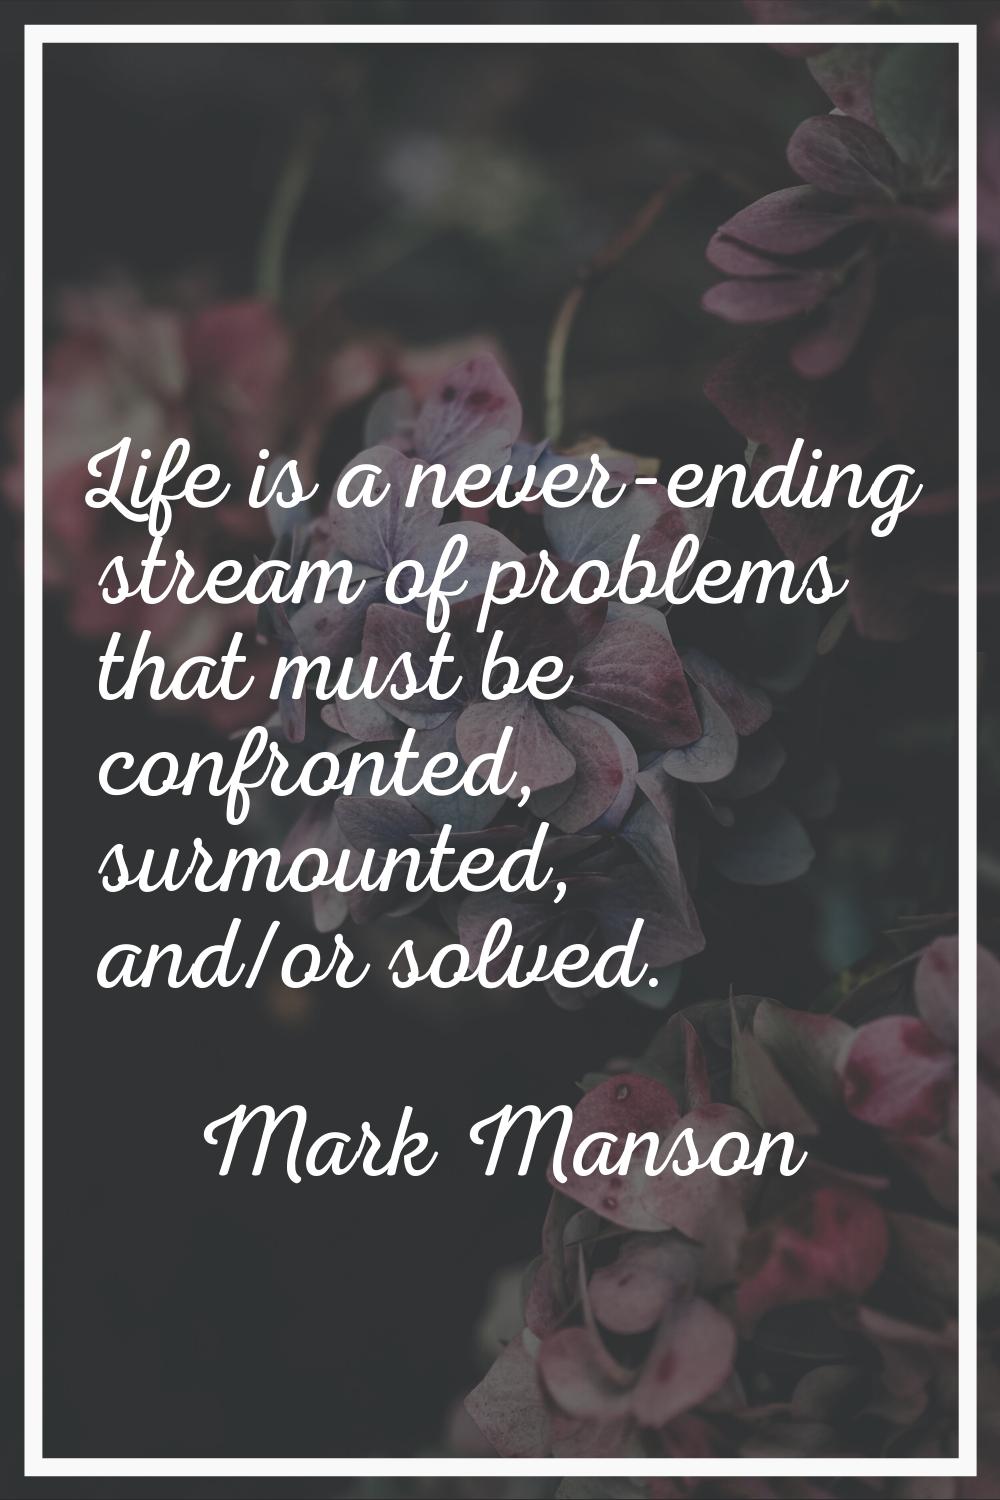 Life is a never-ending stream of problems that must be confronted, surmounted, and/or solved.